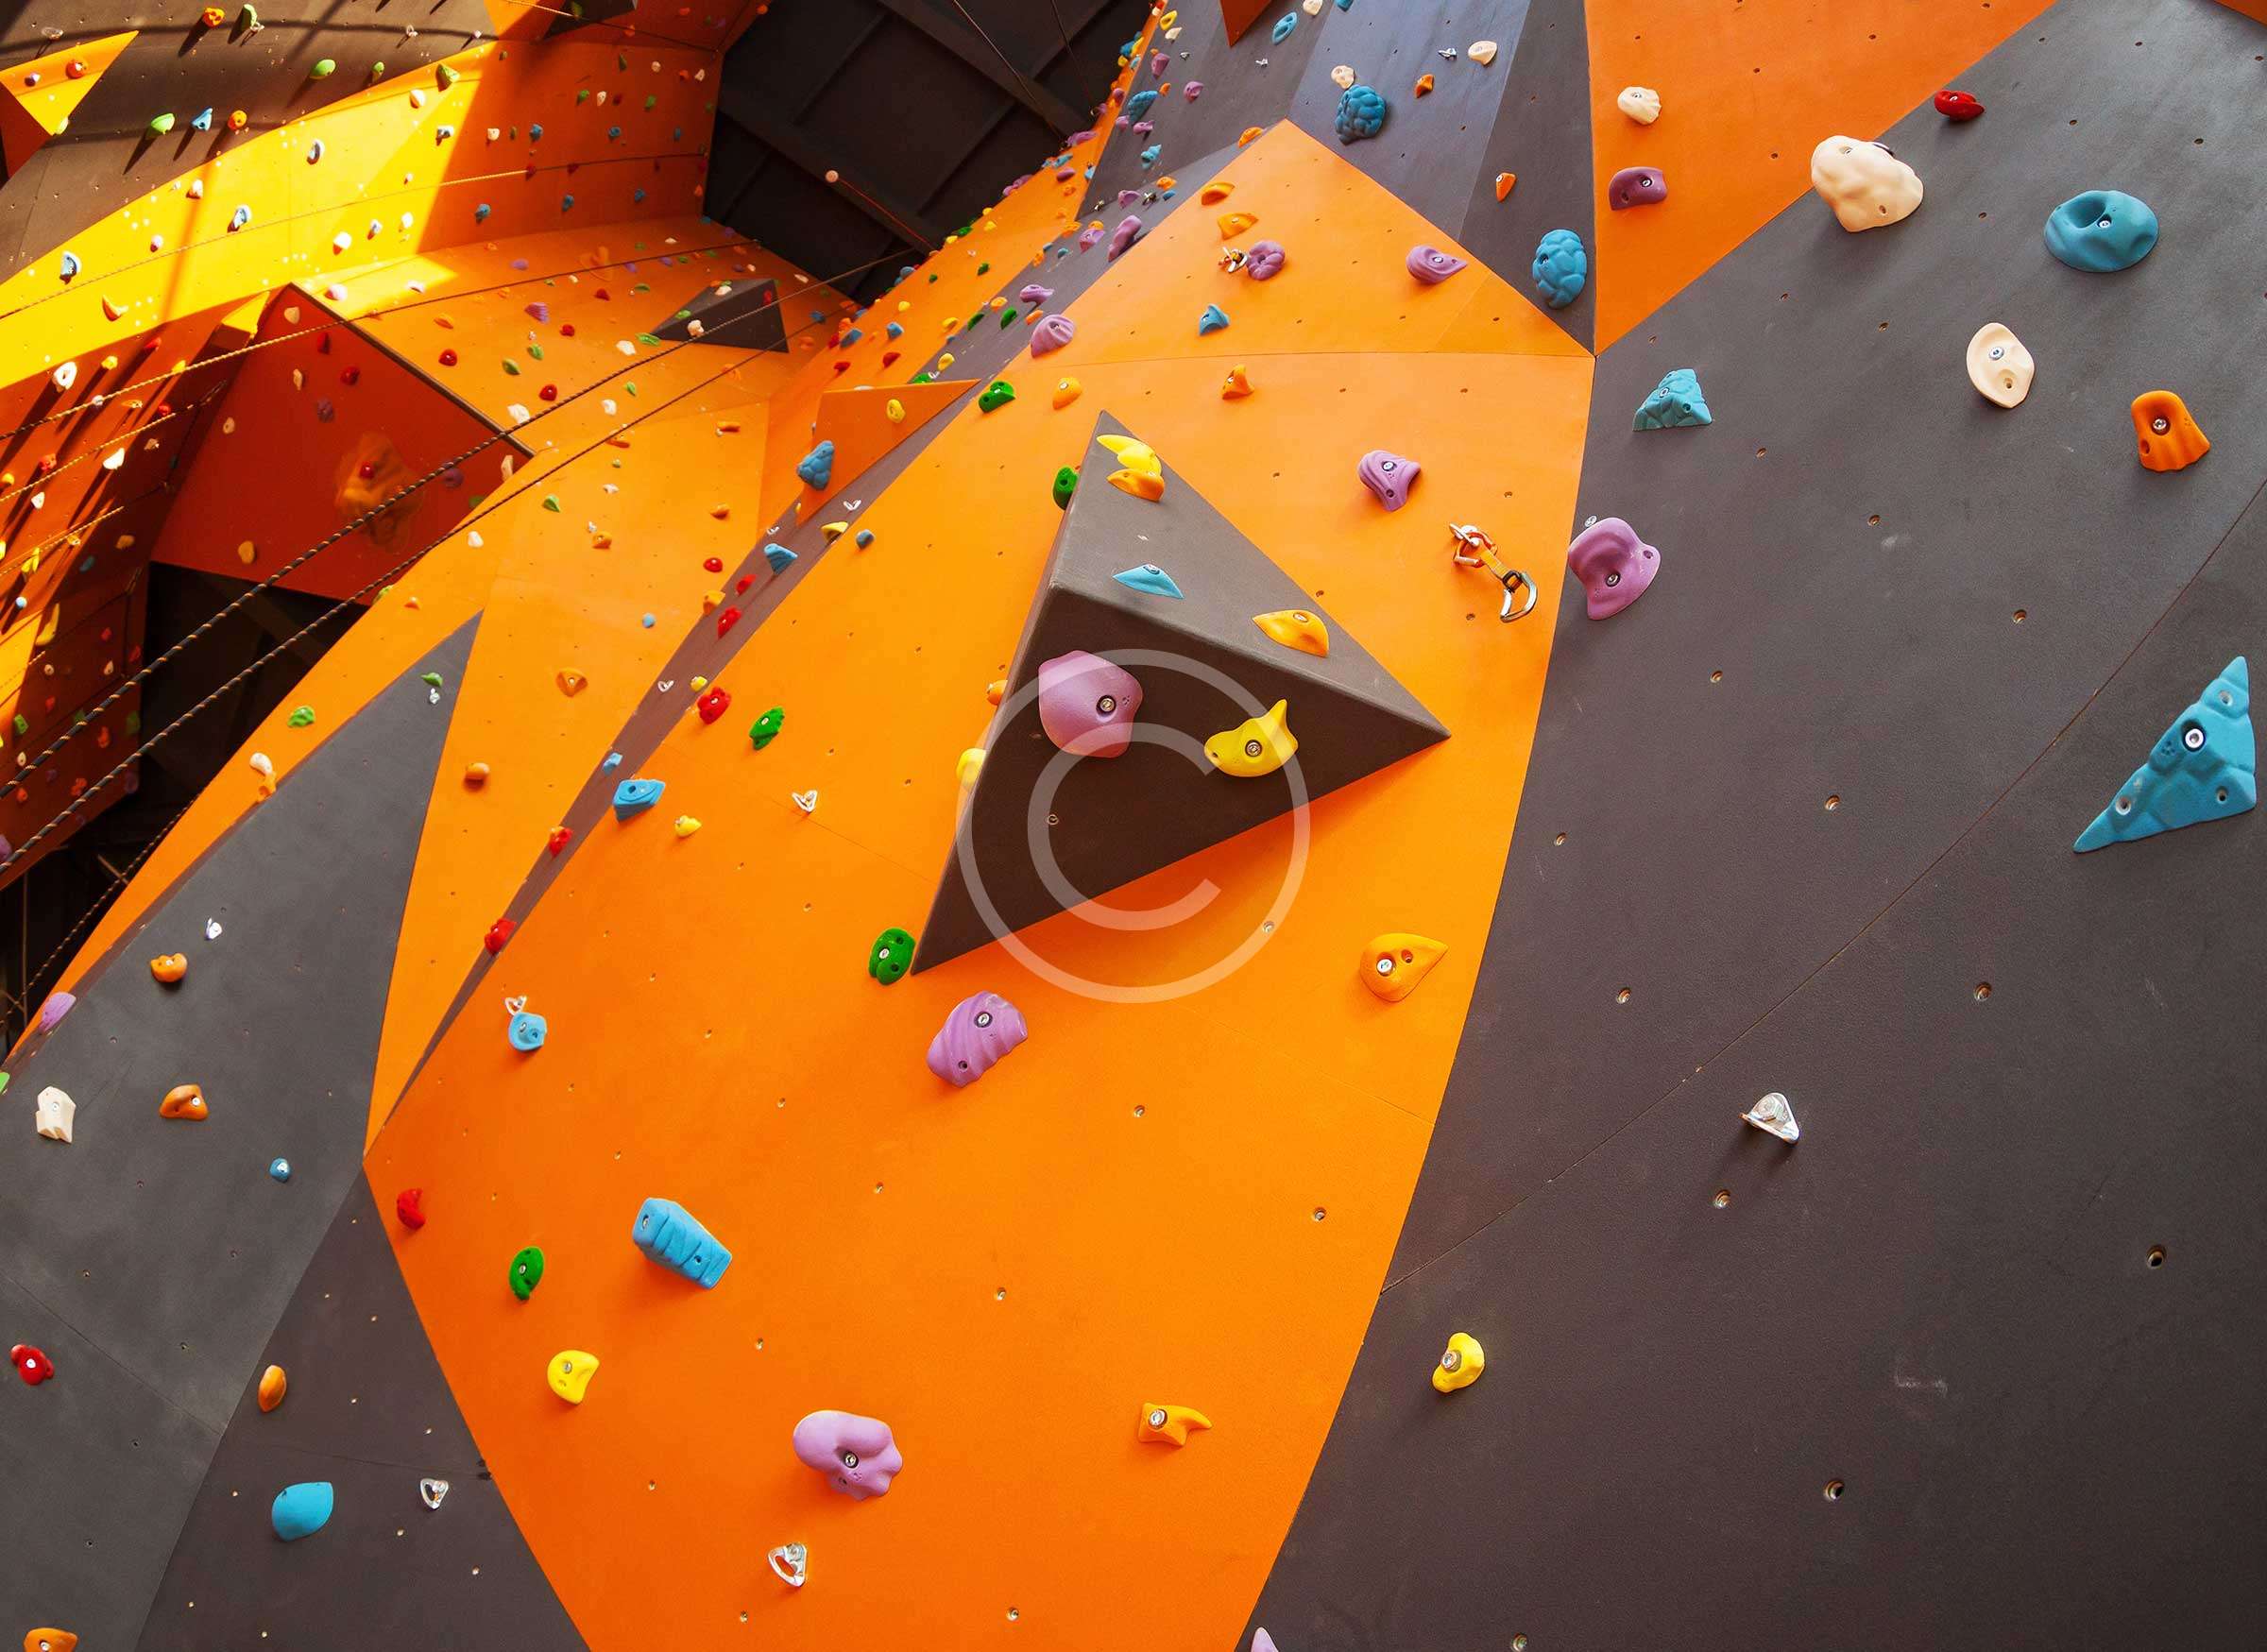 20 Reasons We Keep Falling in Love with Climbing